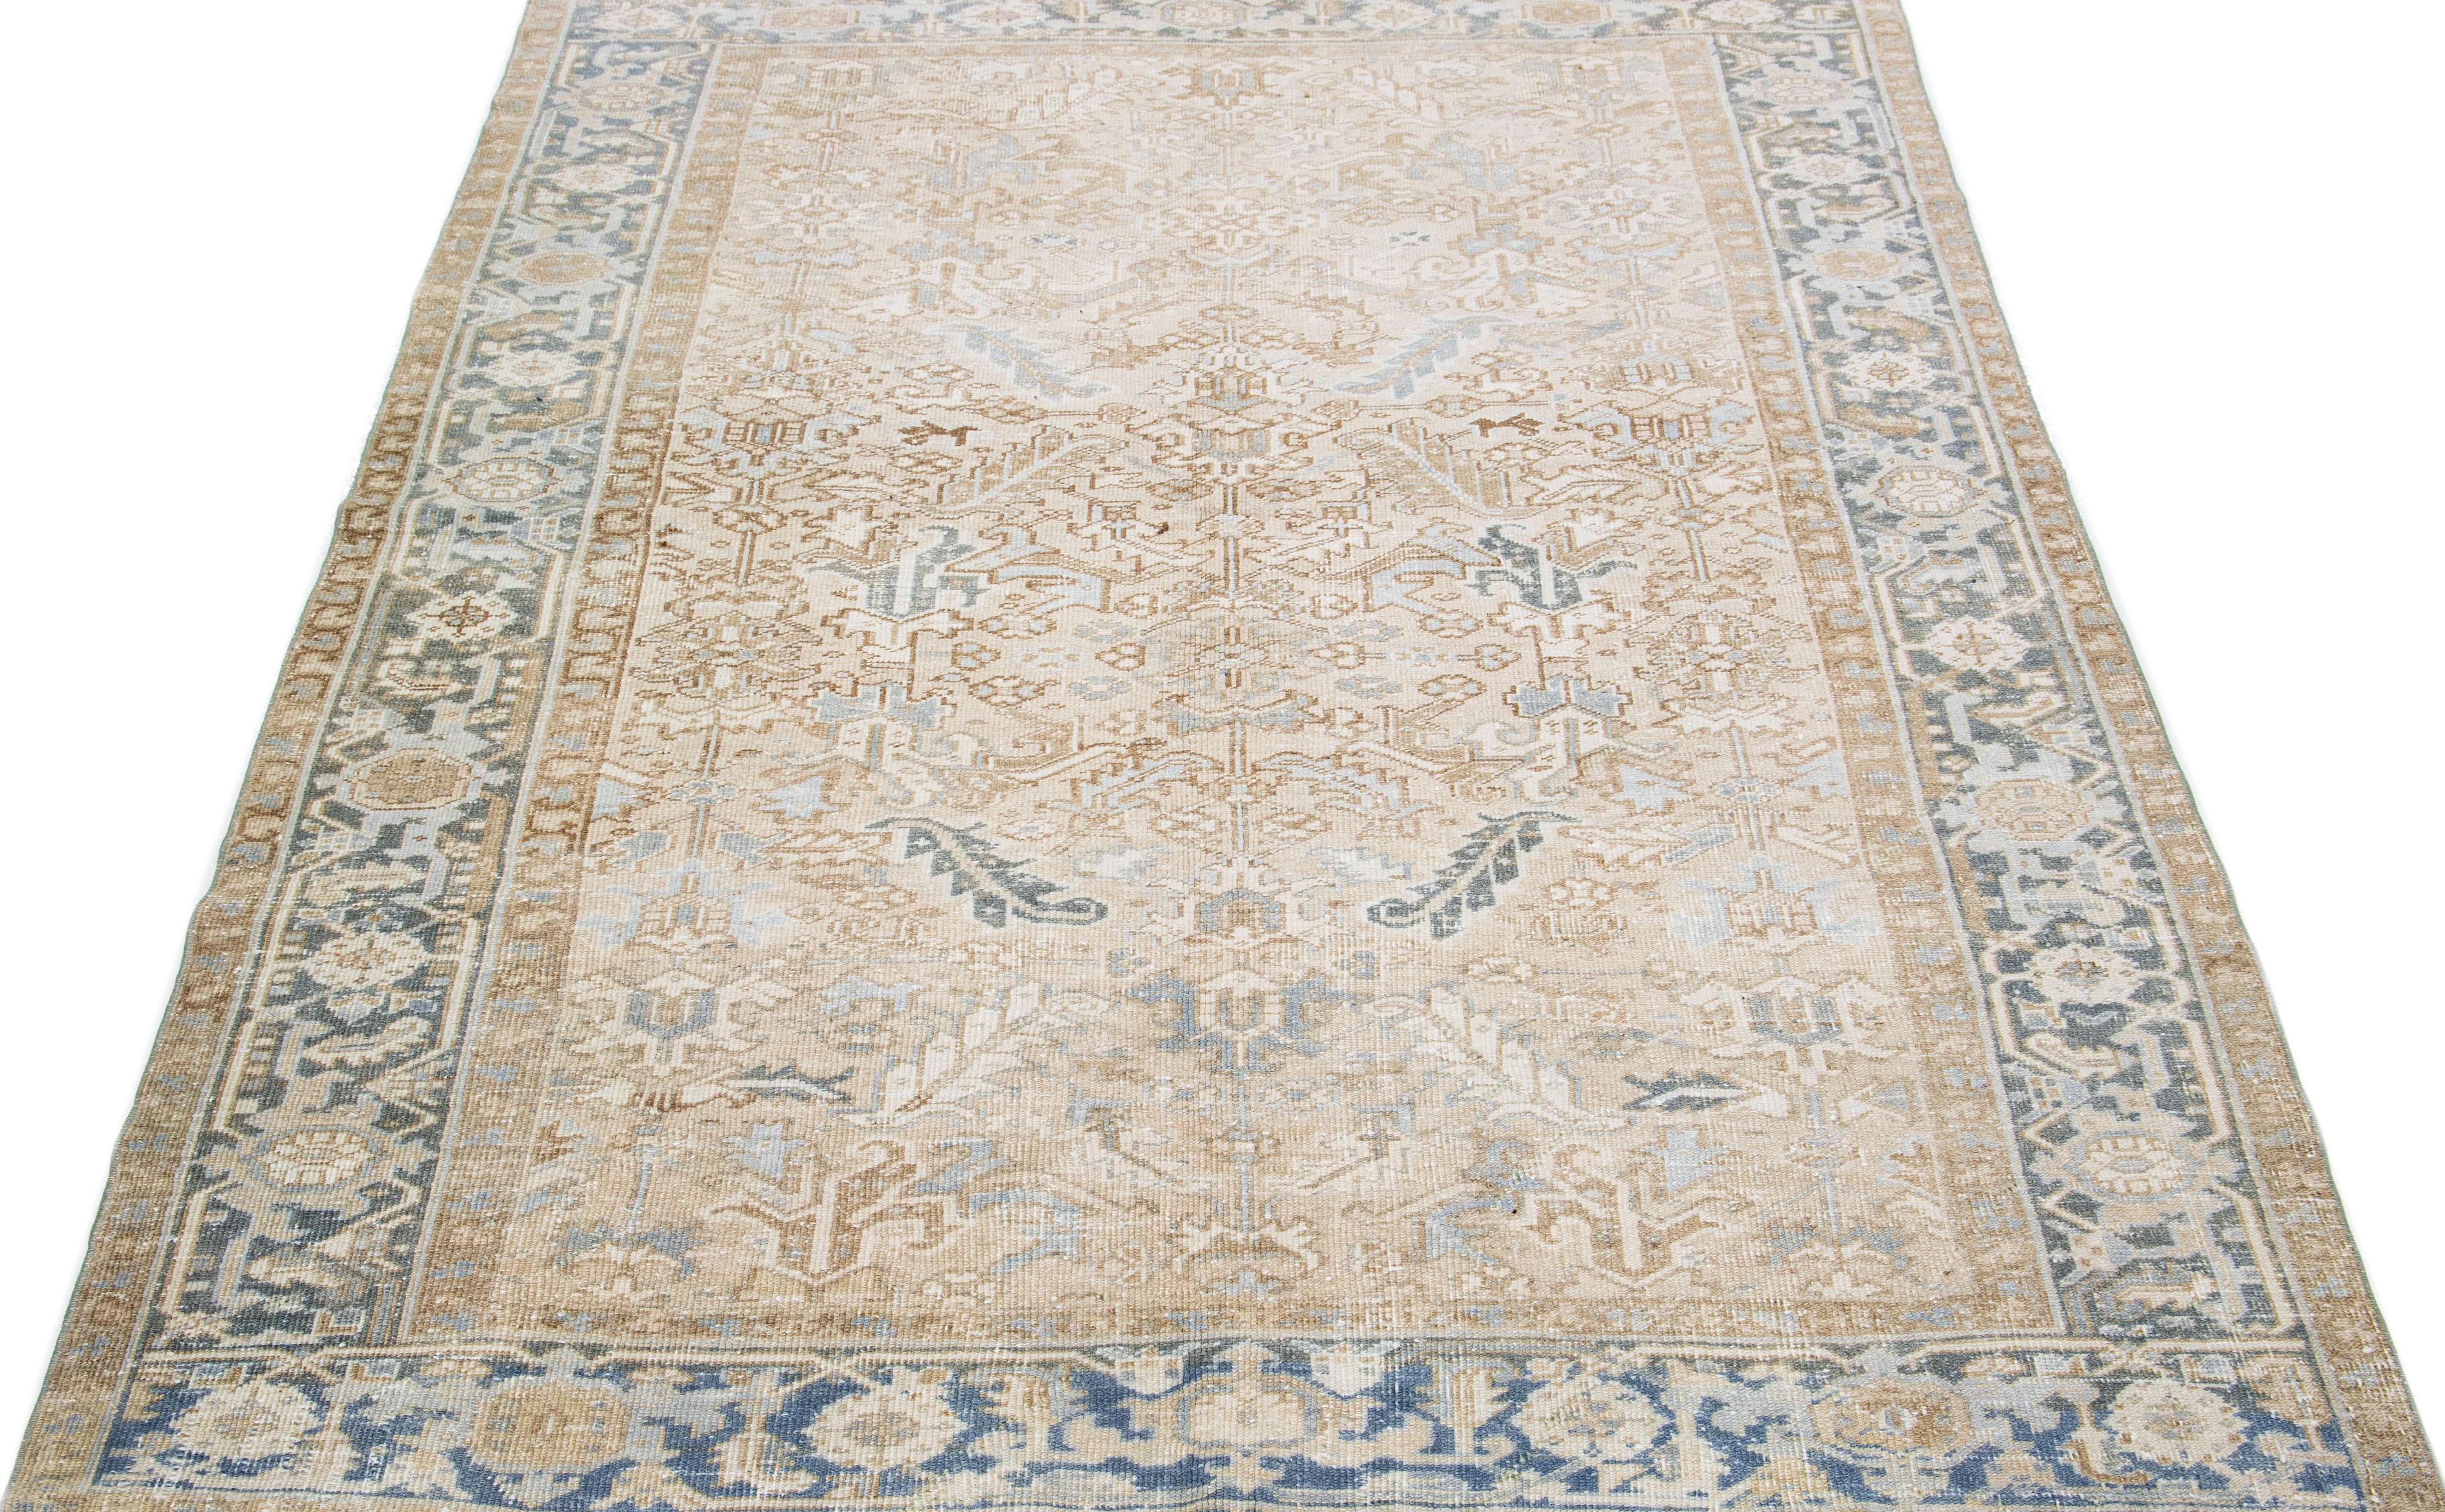 Beautiful antique Heriz hand-knotted wool rug with a beige color field. This Persian rug has a blue frame and accents in a gorgeous all-over geometric floral design.

This rug measures: 7'3